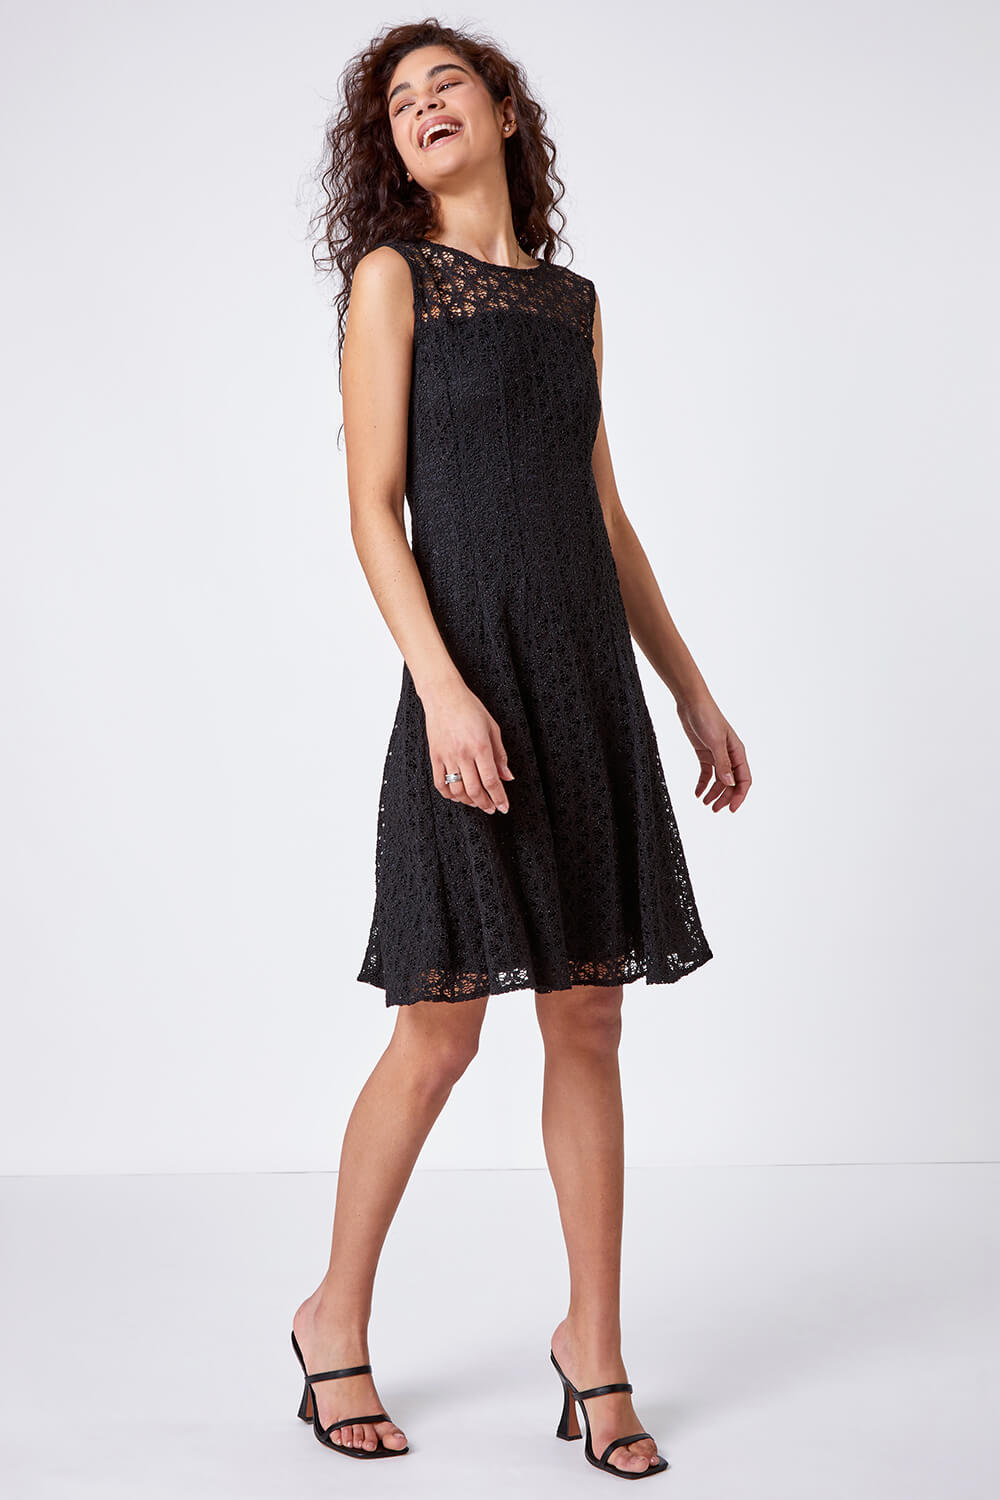 Black Lace Fit and Flare Dress, Image 2 of 5